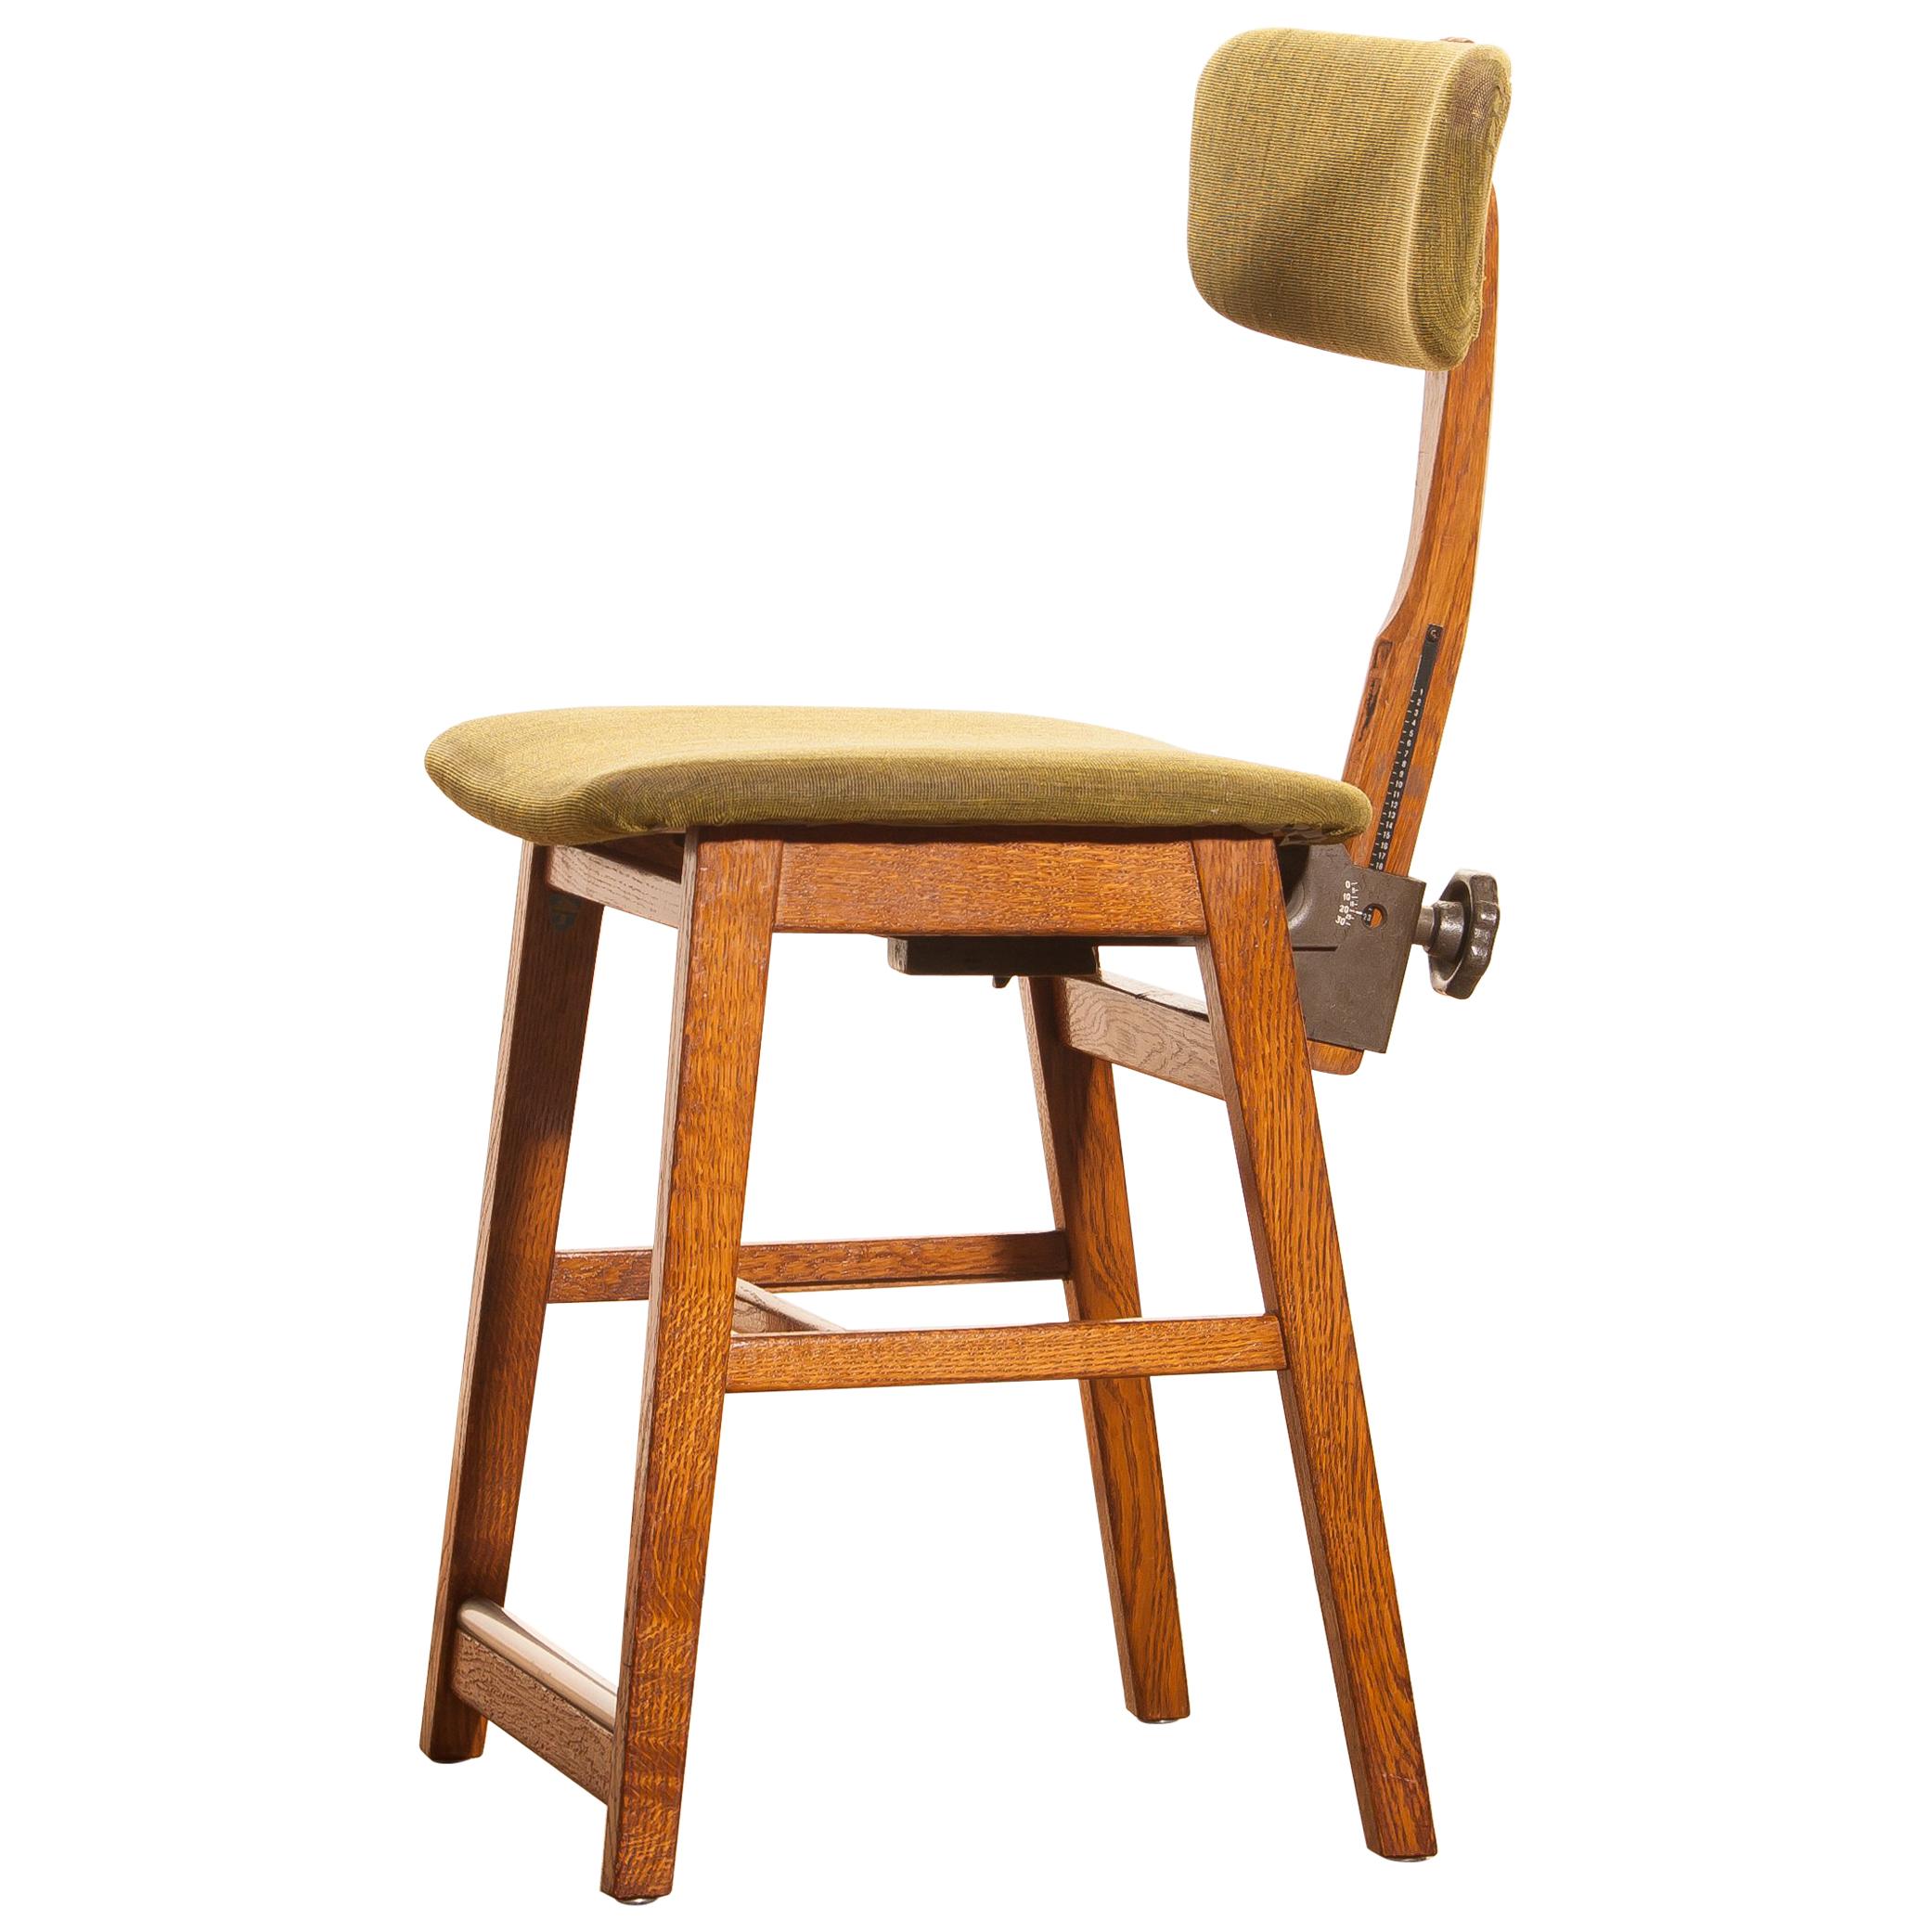 1960s, Teak and Wool Desk Chair by Âtvidabergs, Sweden